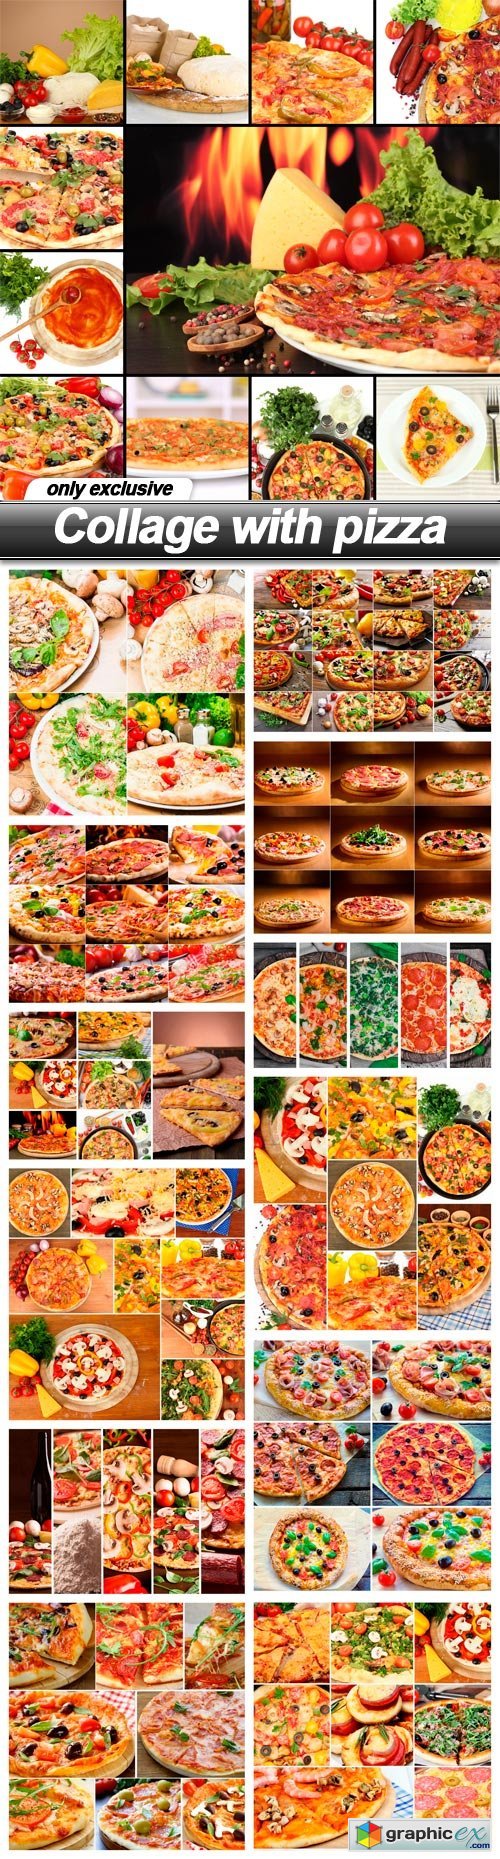 Collage with pizza - 13 UHQ JPEG